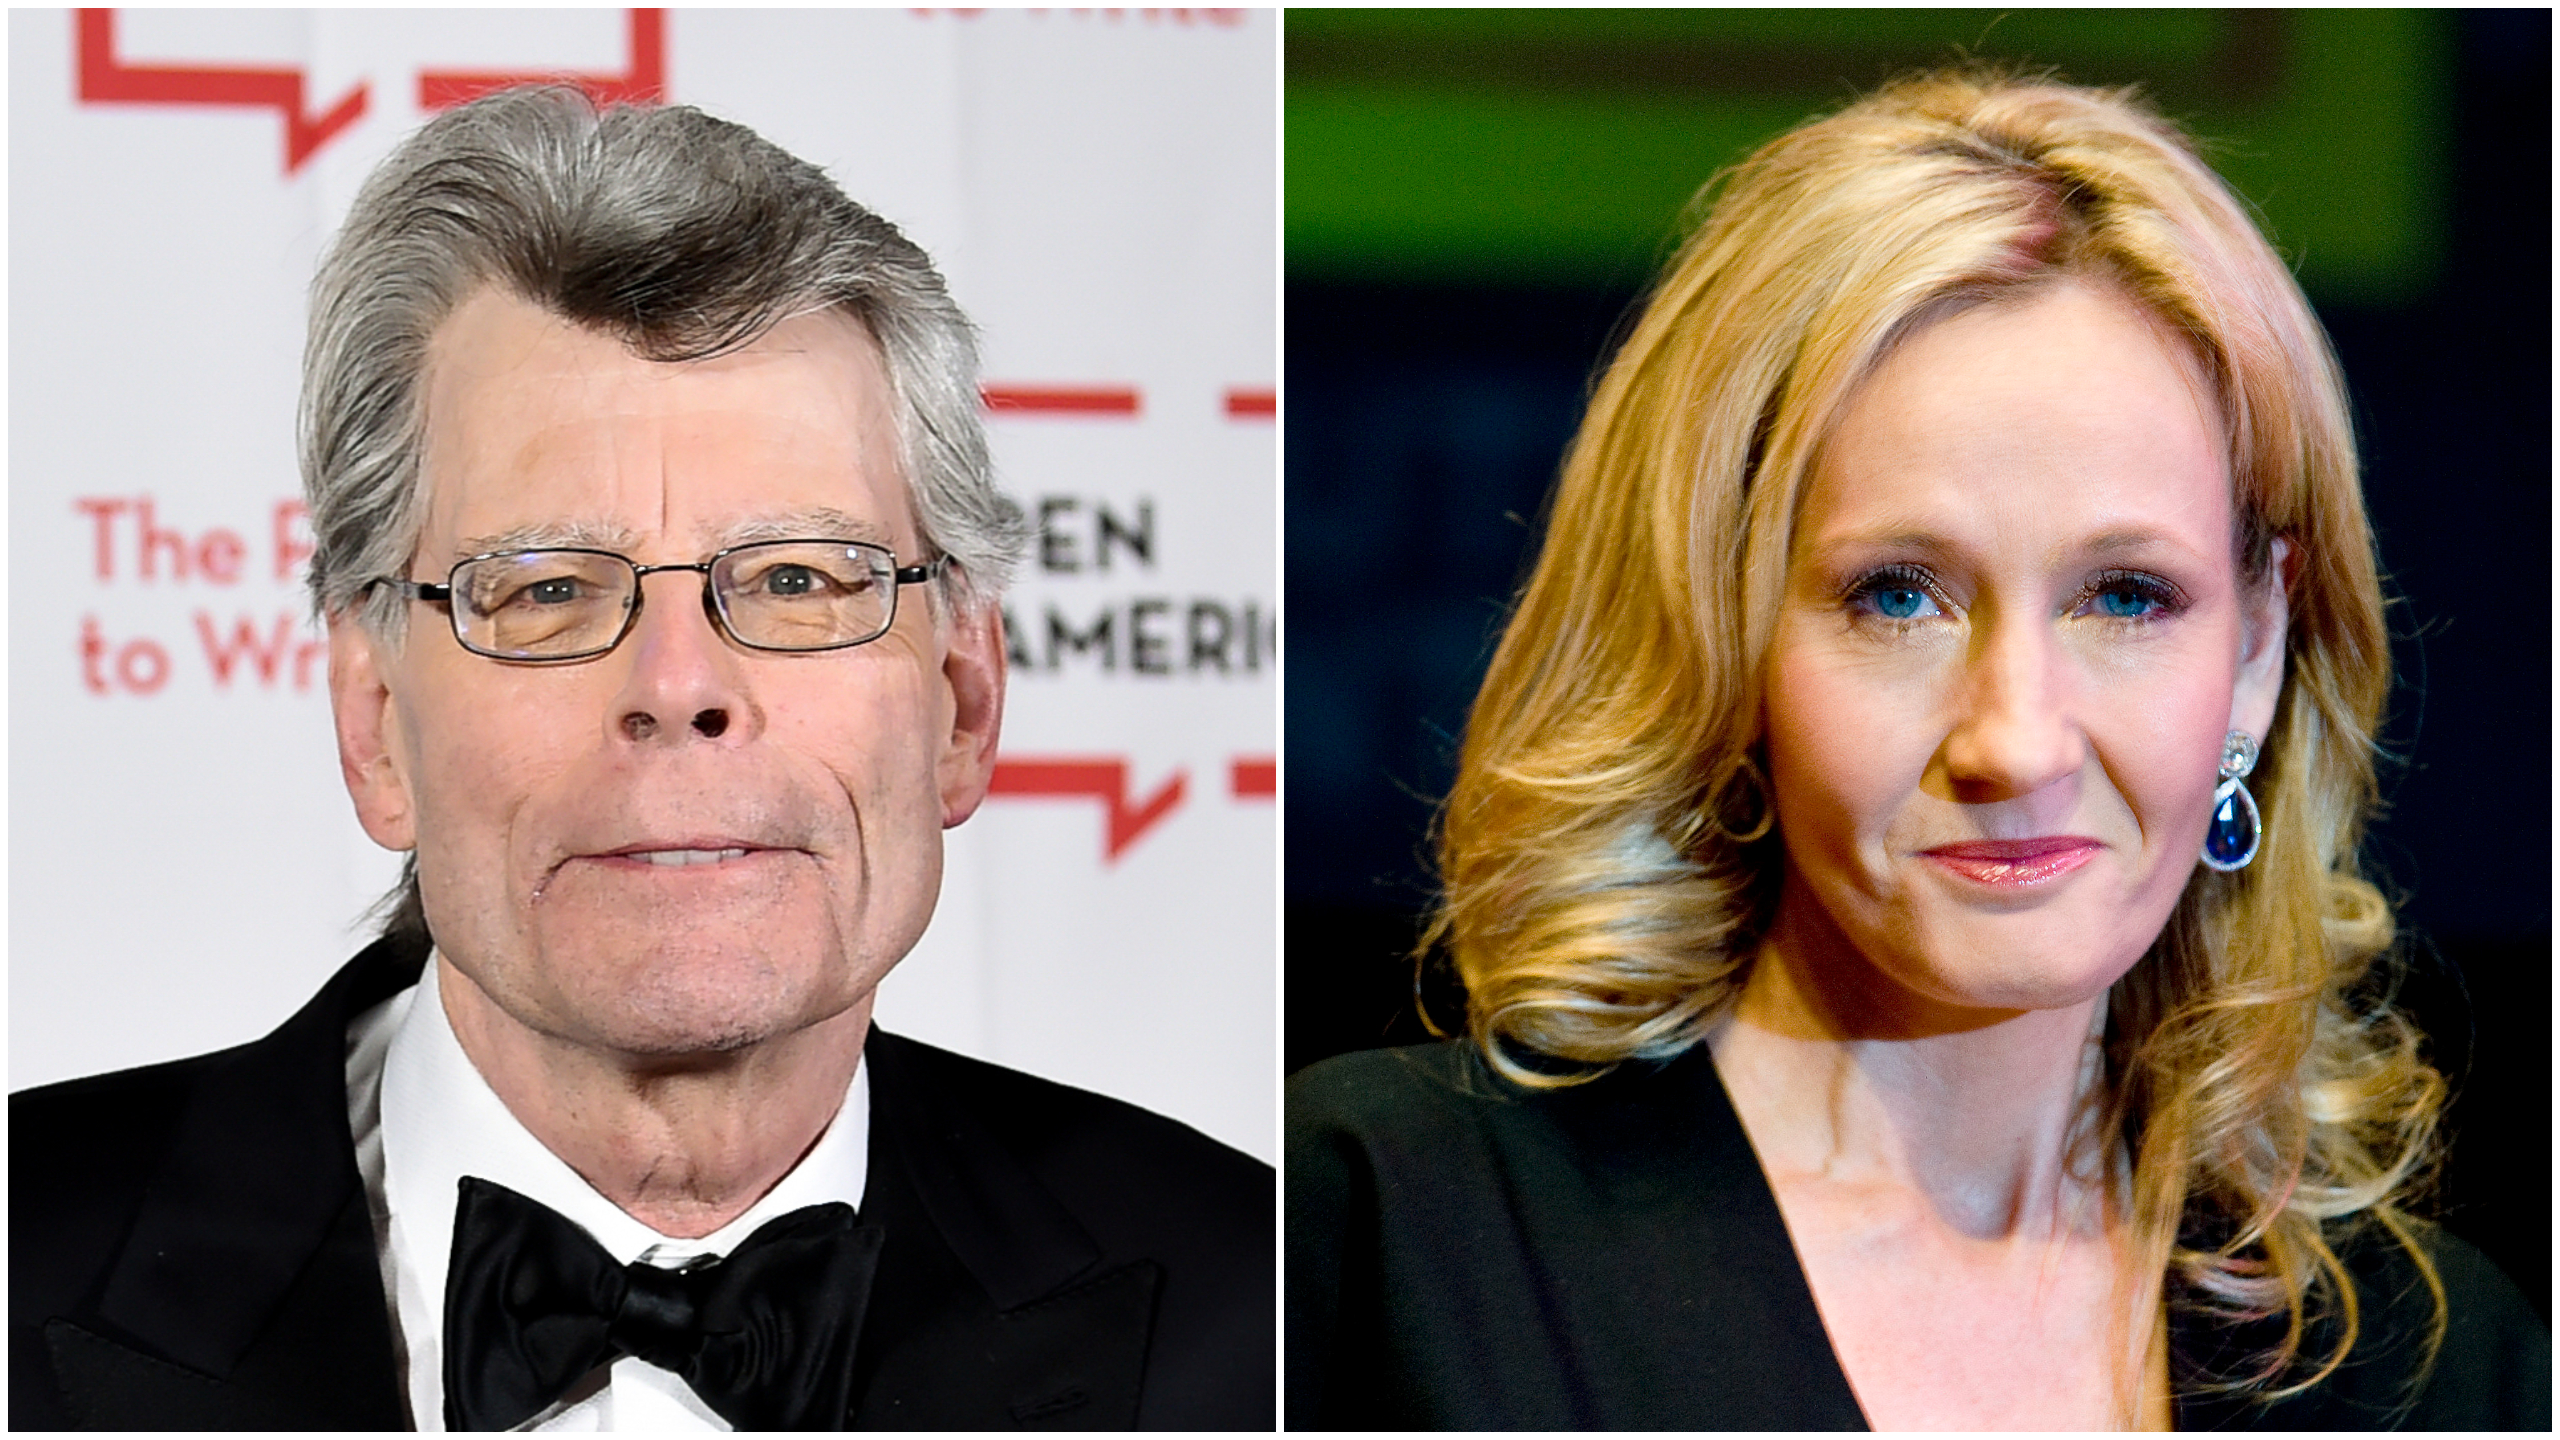 Stephen King and JK Rowling.